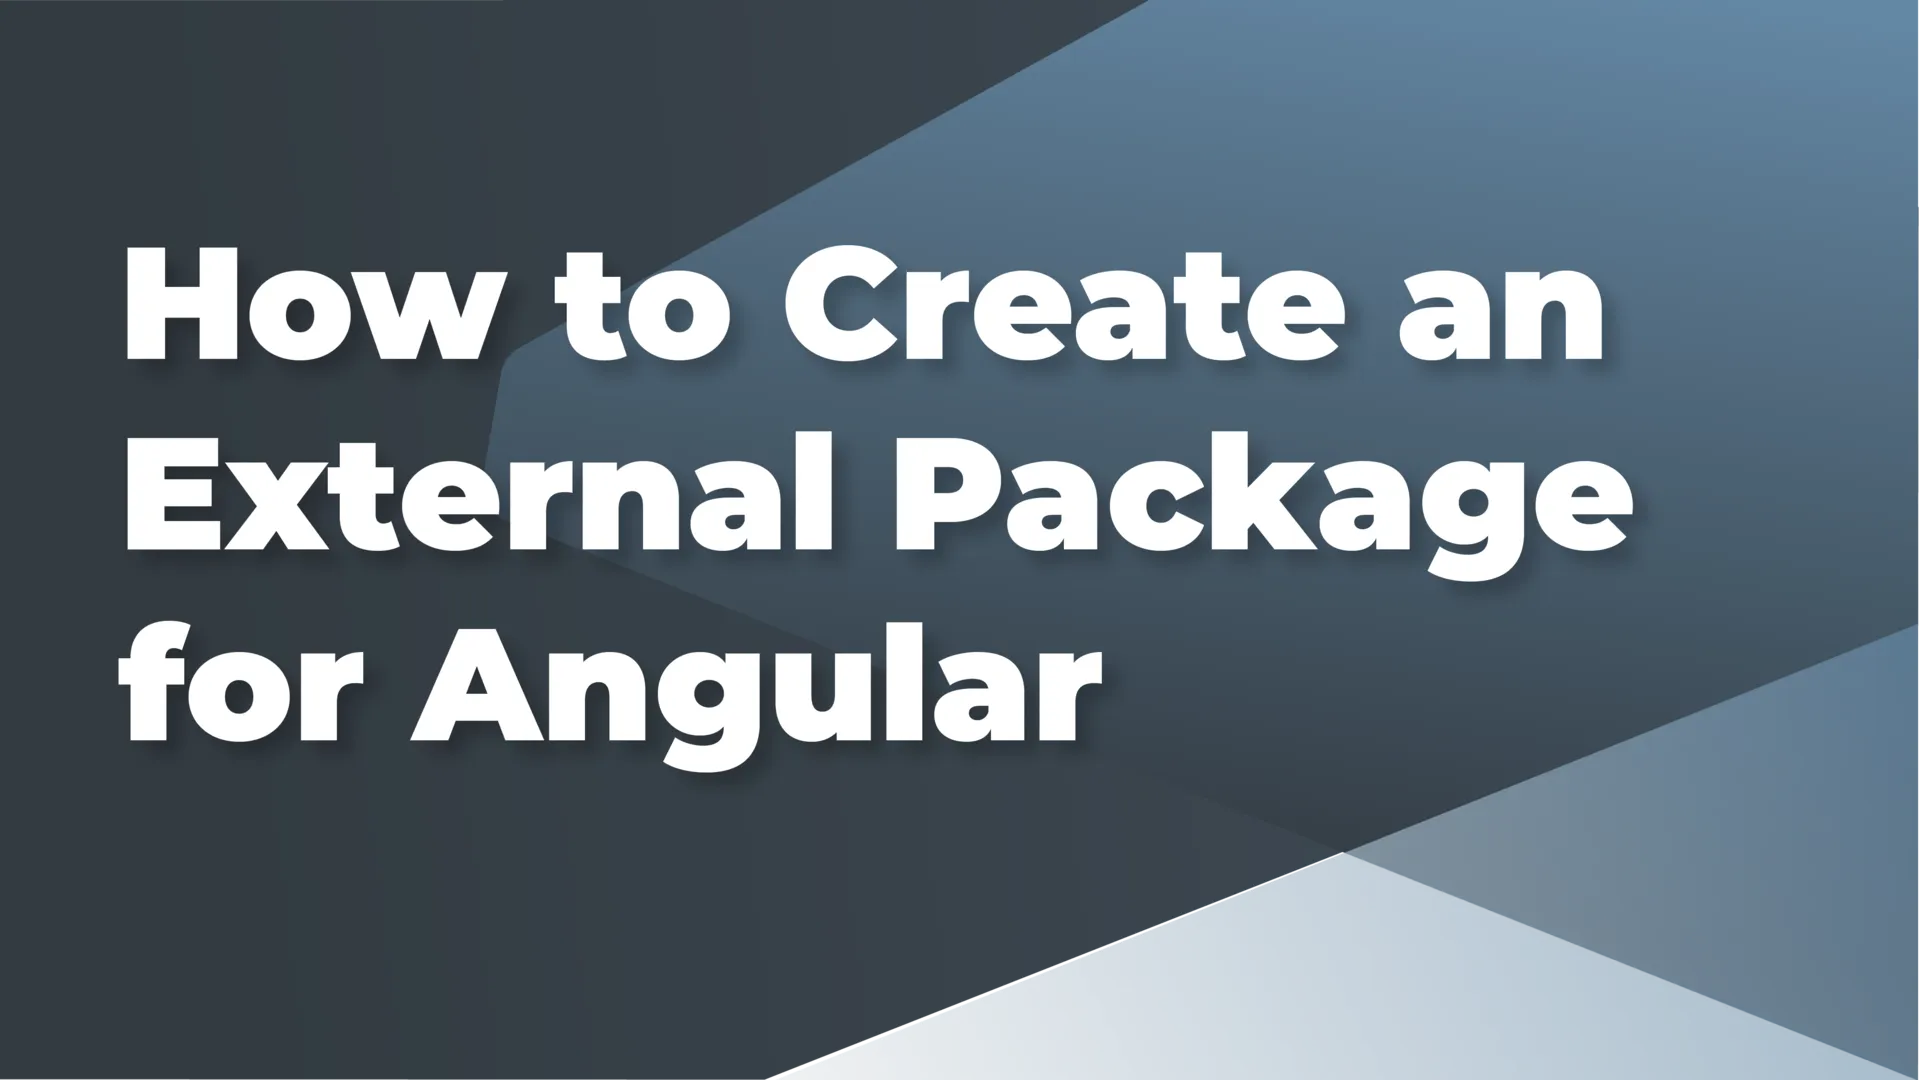 How to Create an External Package for Angular